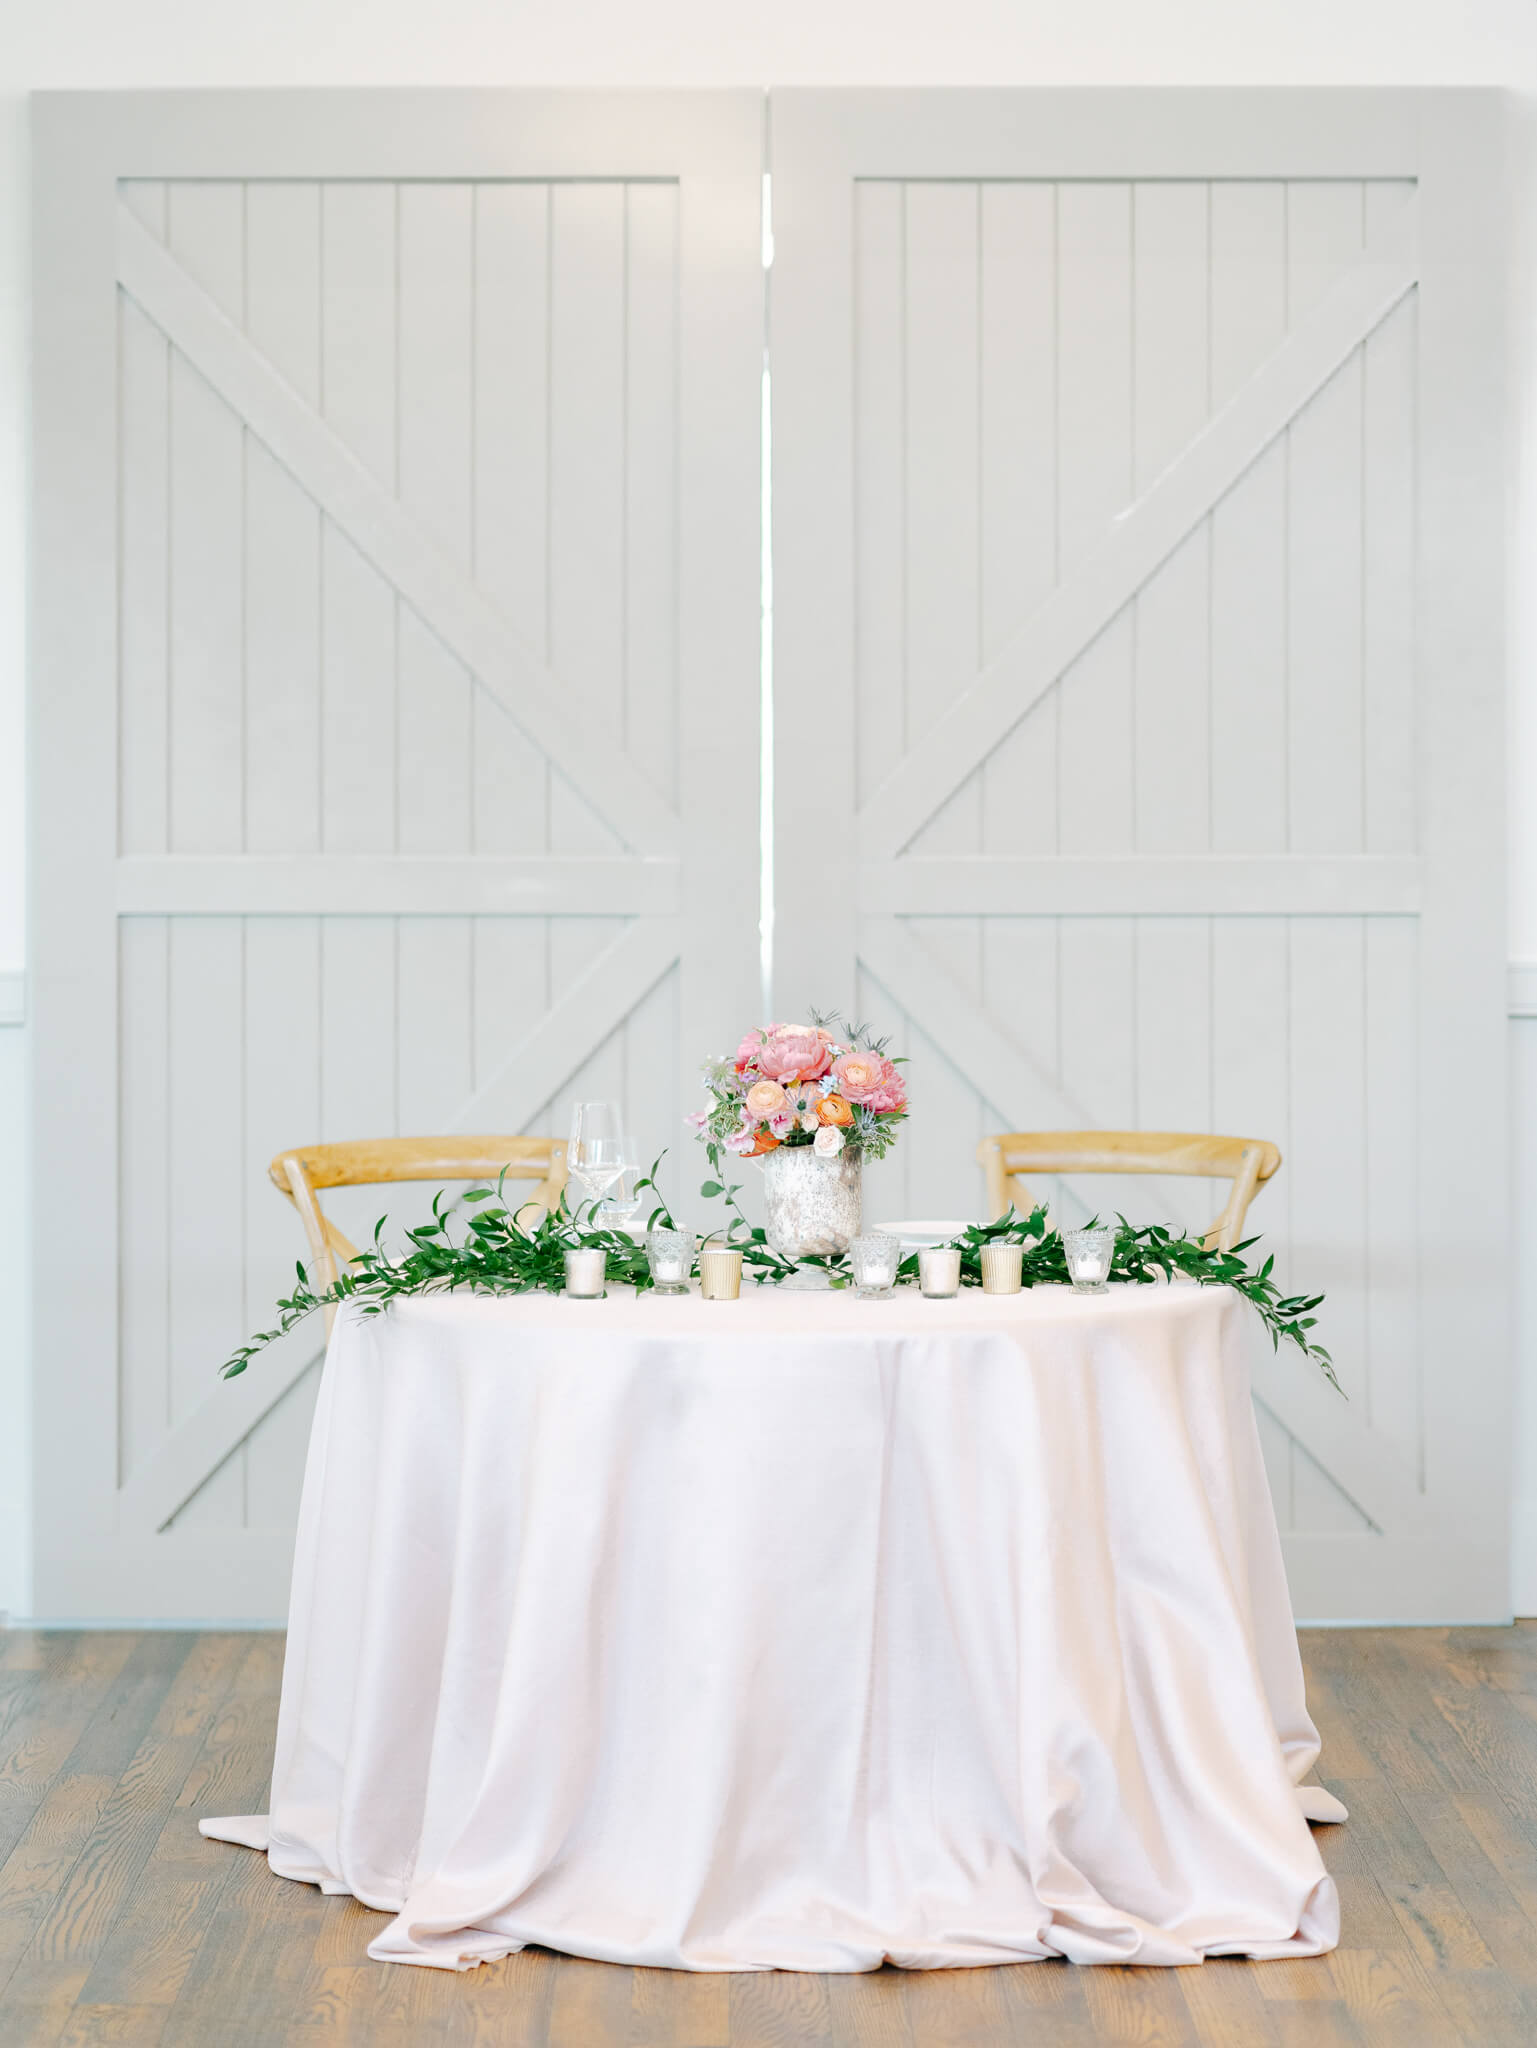 A sweetheart table decorated with a blush table cloth, colorful bouquet and greenery in front of grey barn doors inside a reception space.